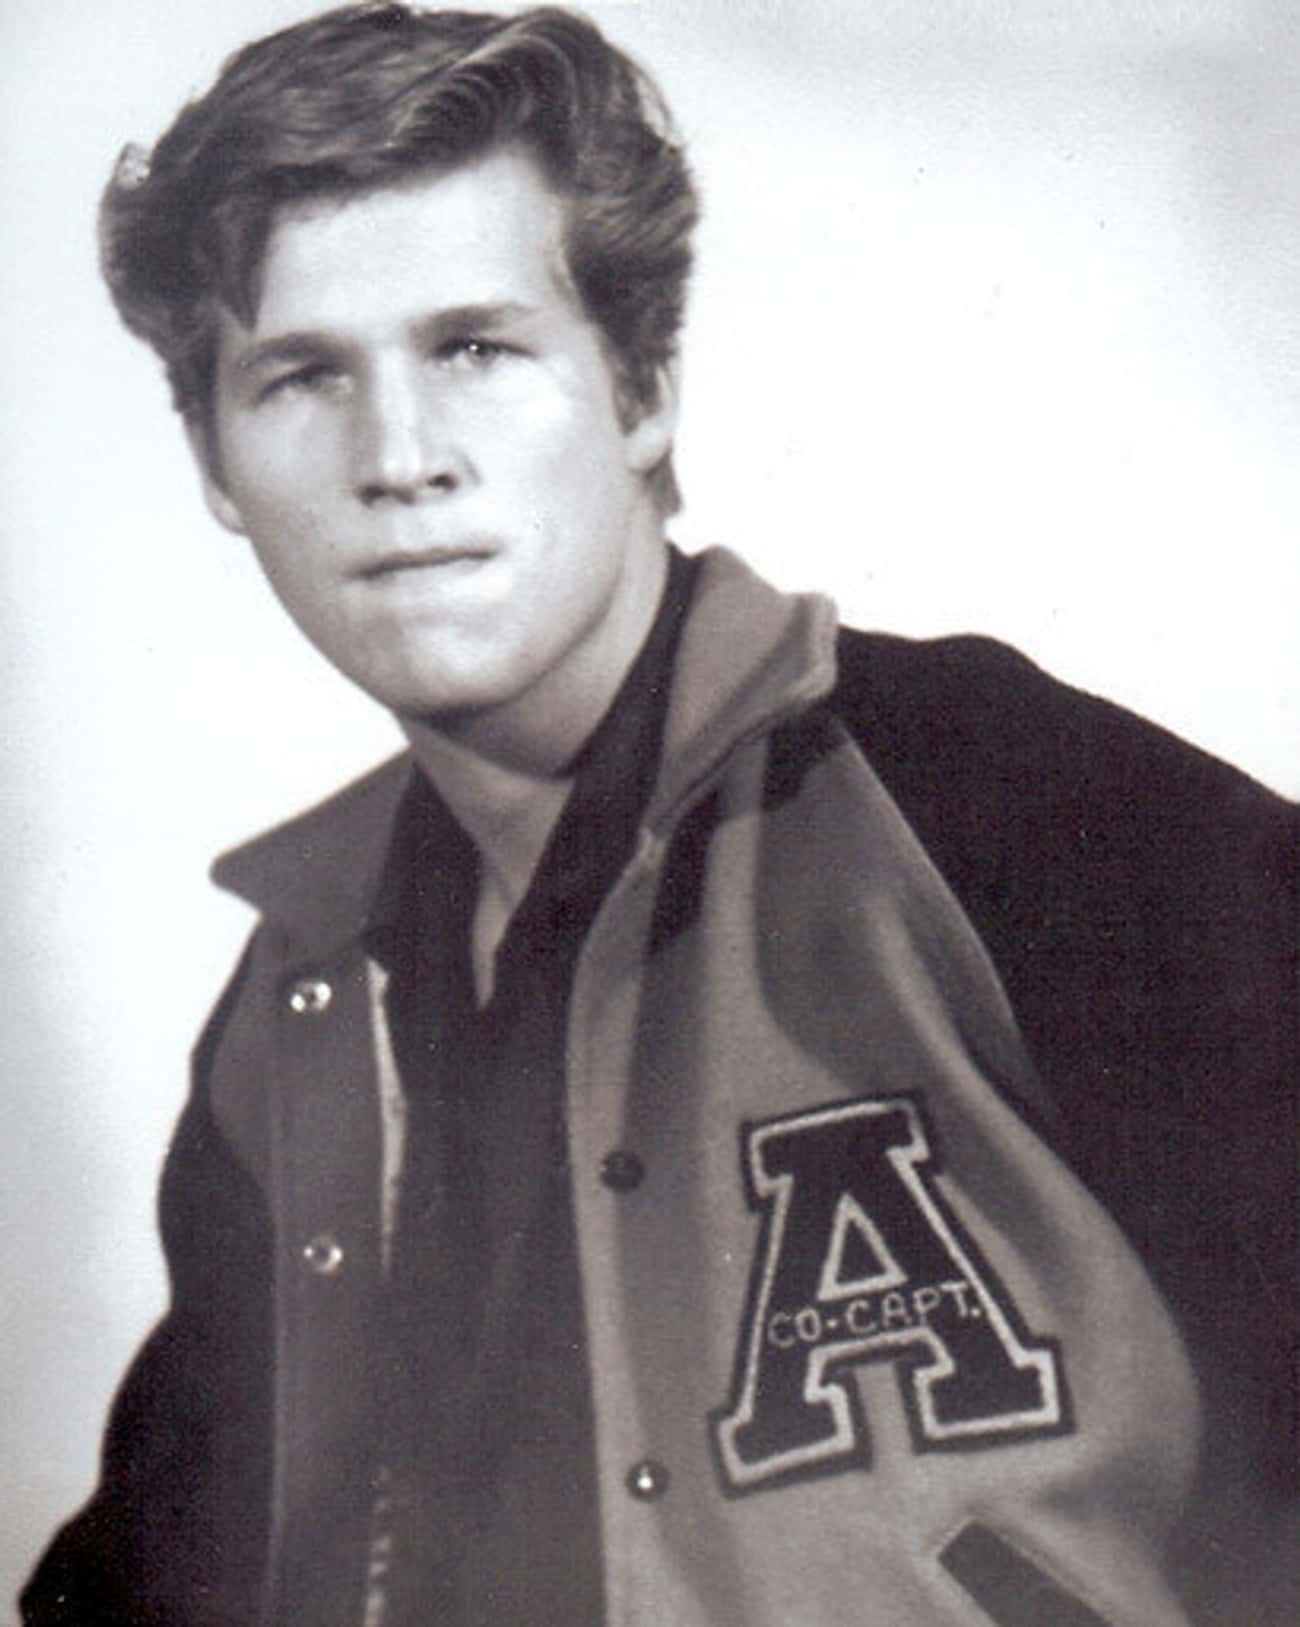 Young Jeff Bridges in a High School Letter Jacket